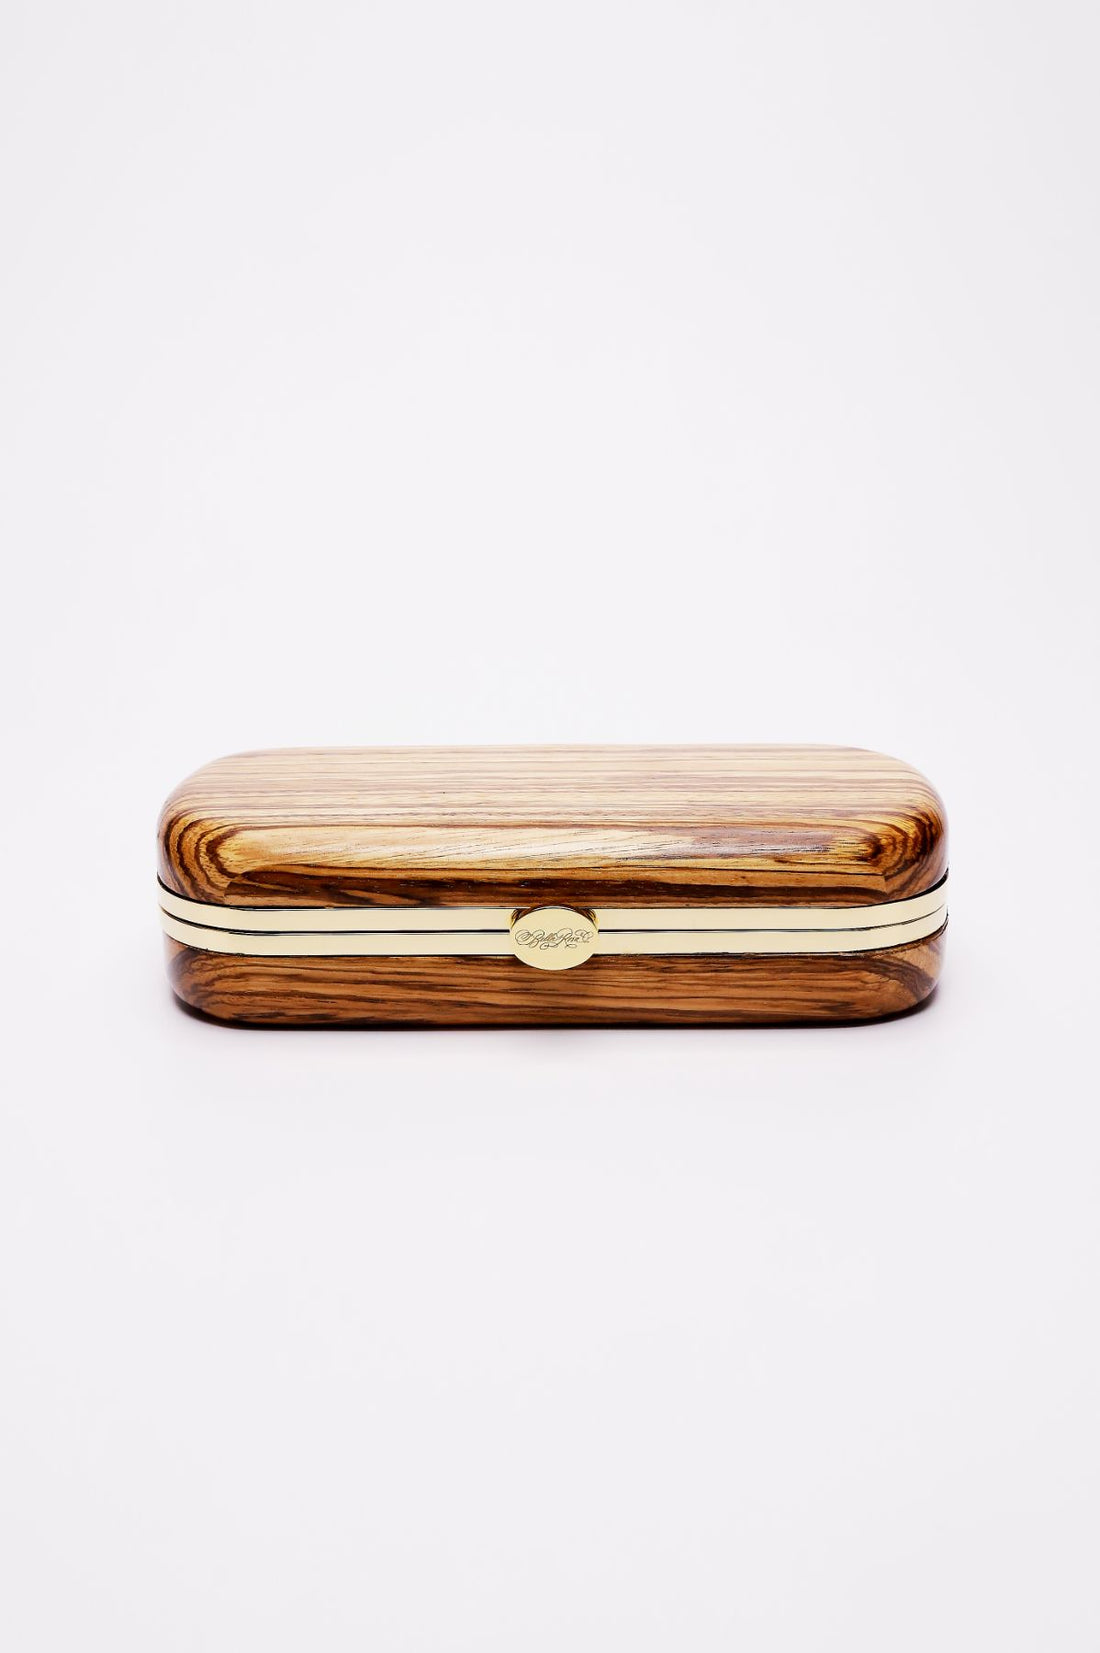 A sustainably sourced Bella Clutch African Zebra Wood Petite eyeglass case with a metal clasp on a white background by The Bella Rosa Collection.